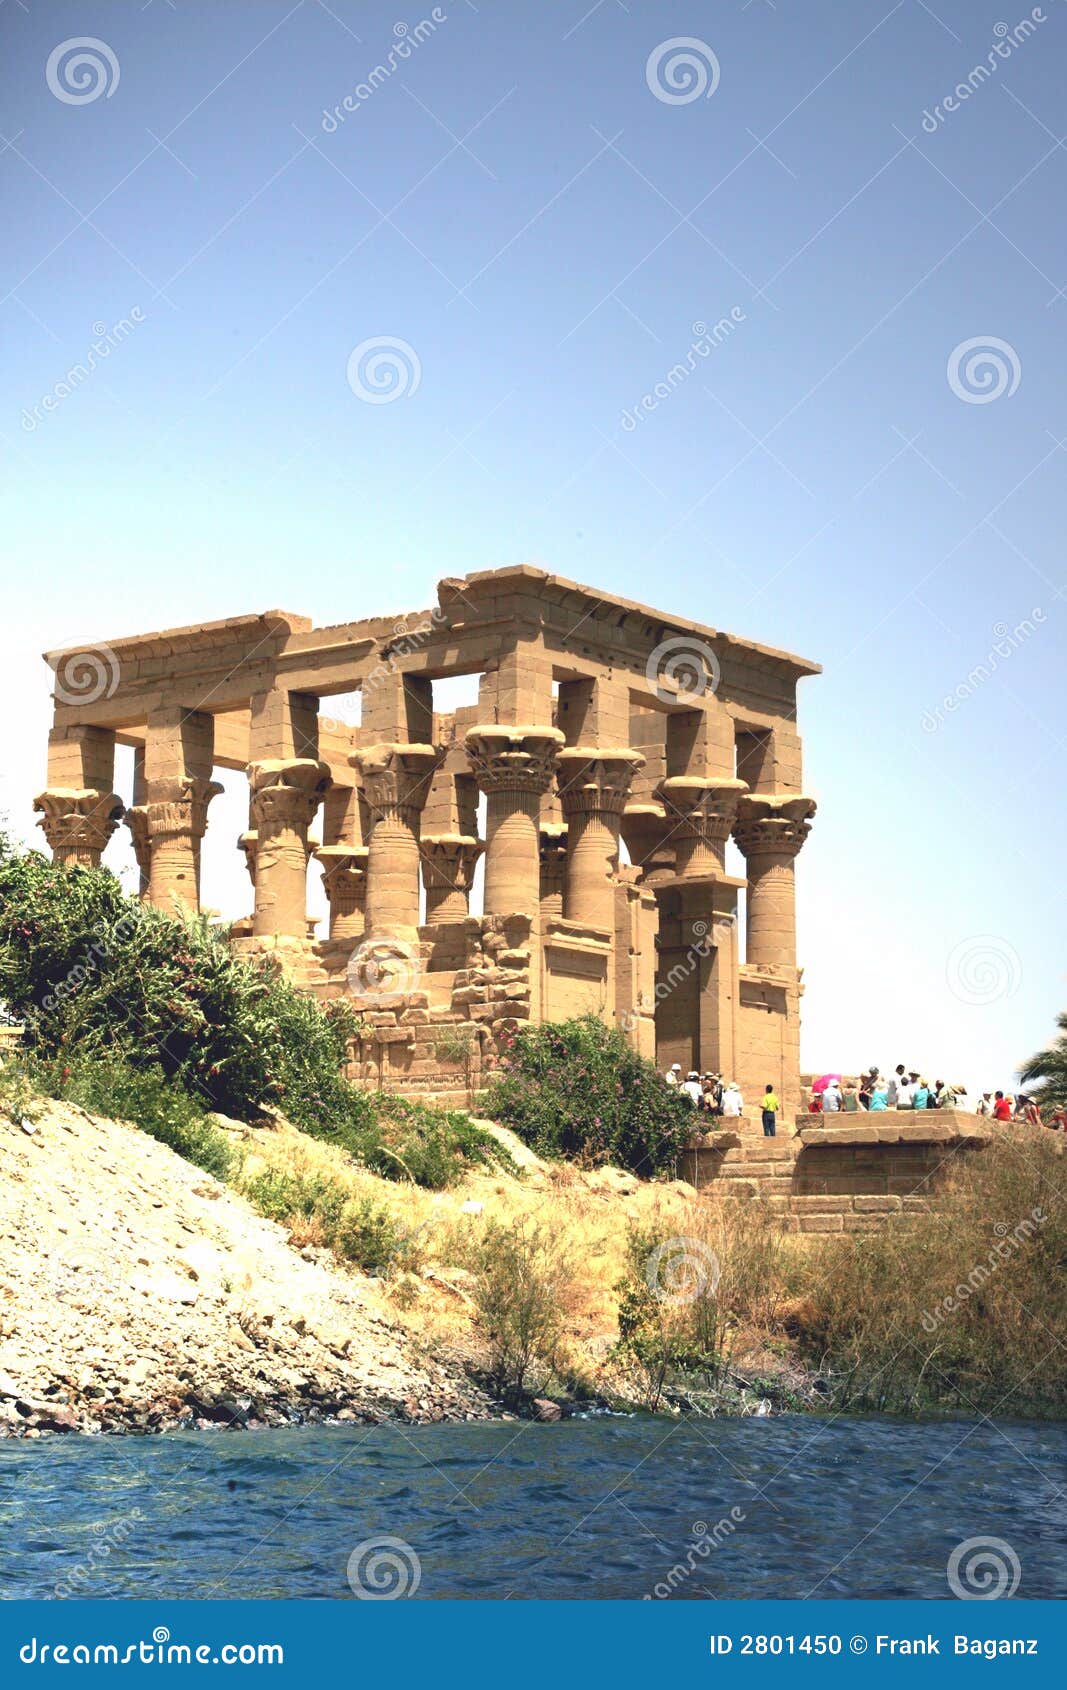 Temple of Isis stock photo. Image of temple, africa, architecture - 2801450